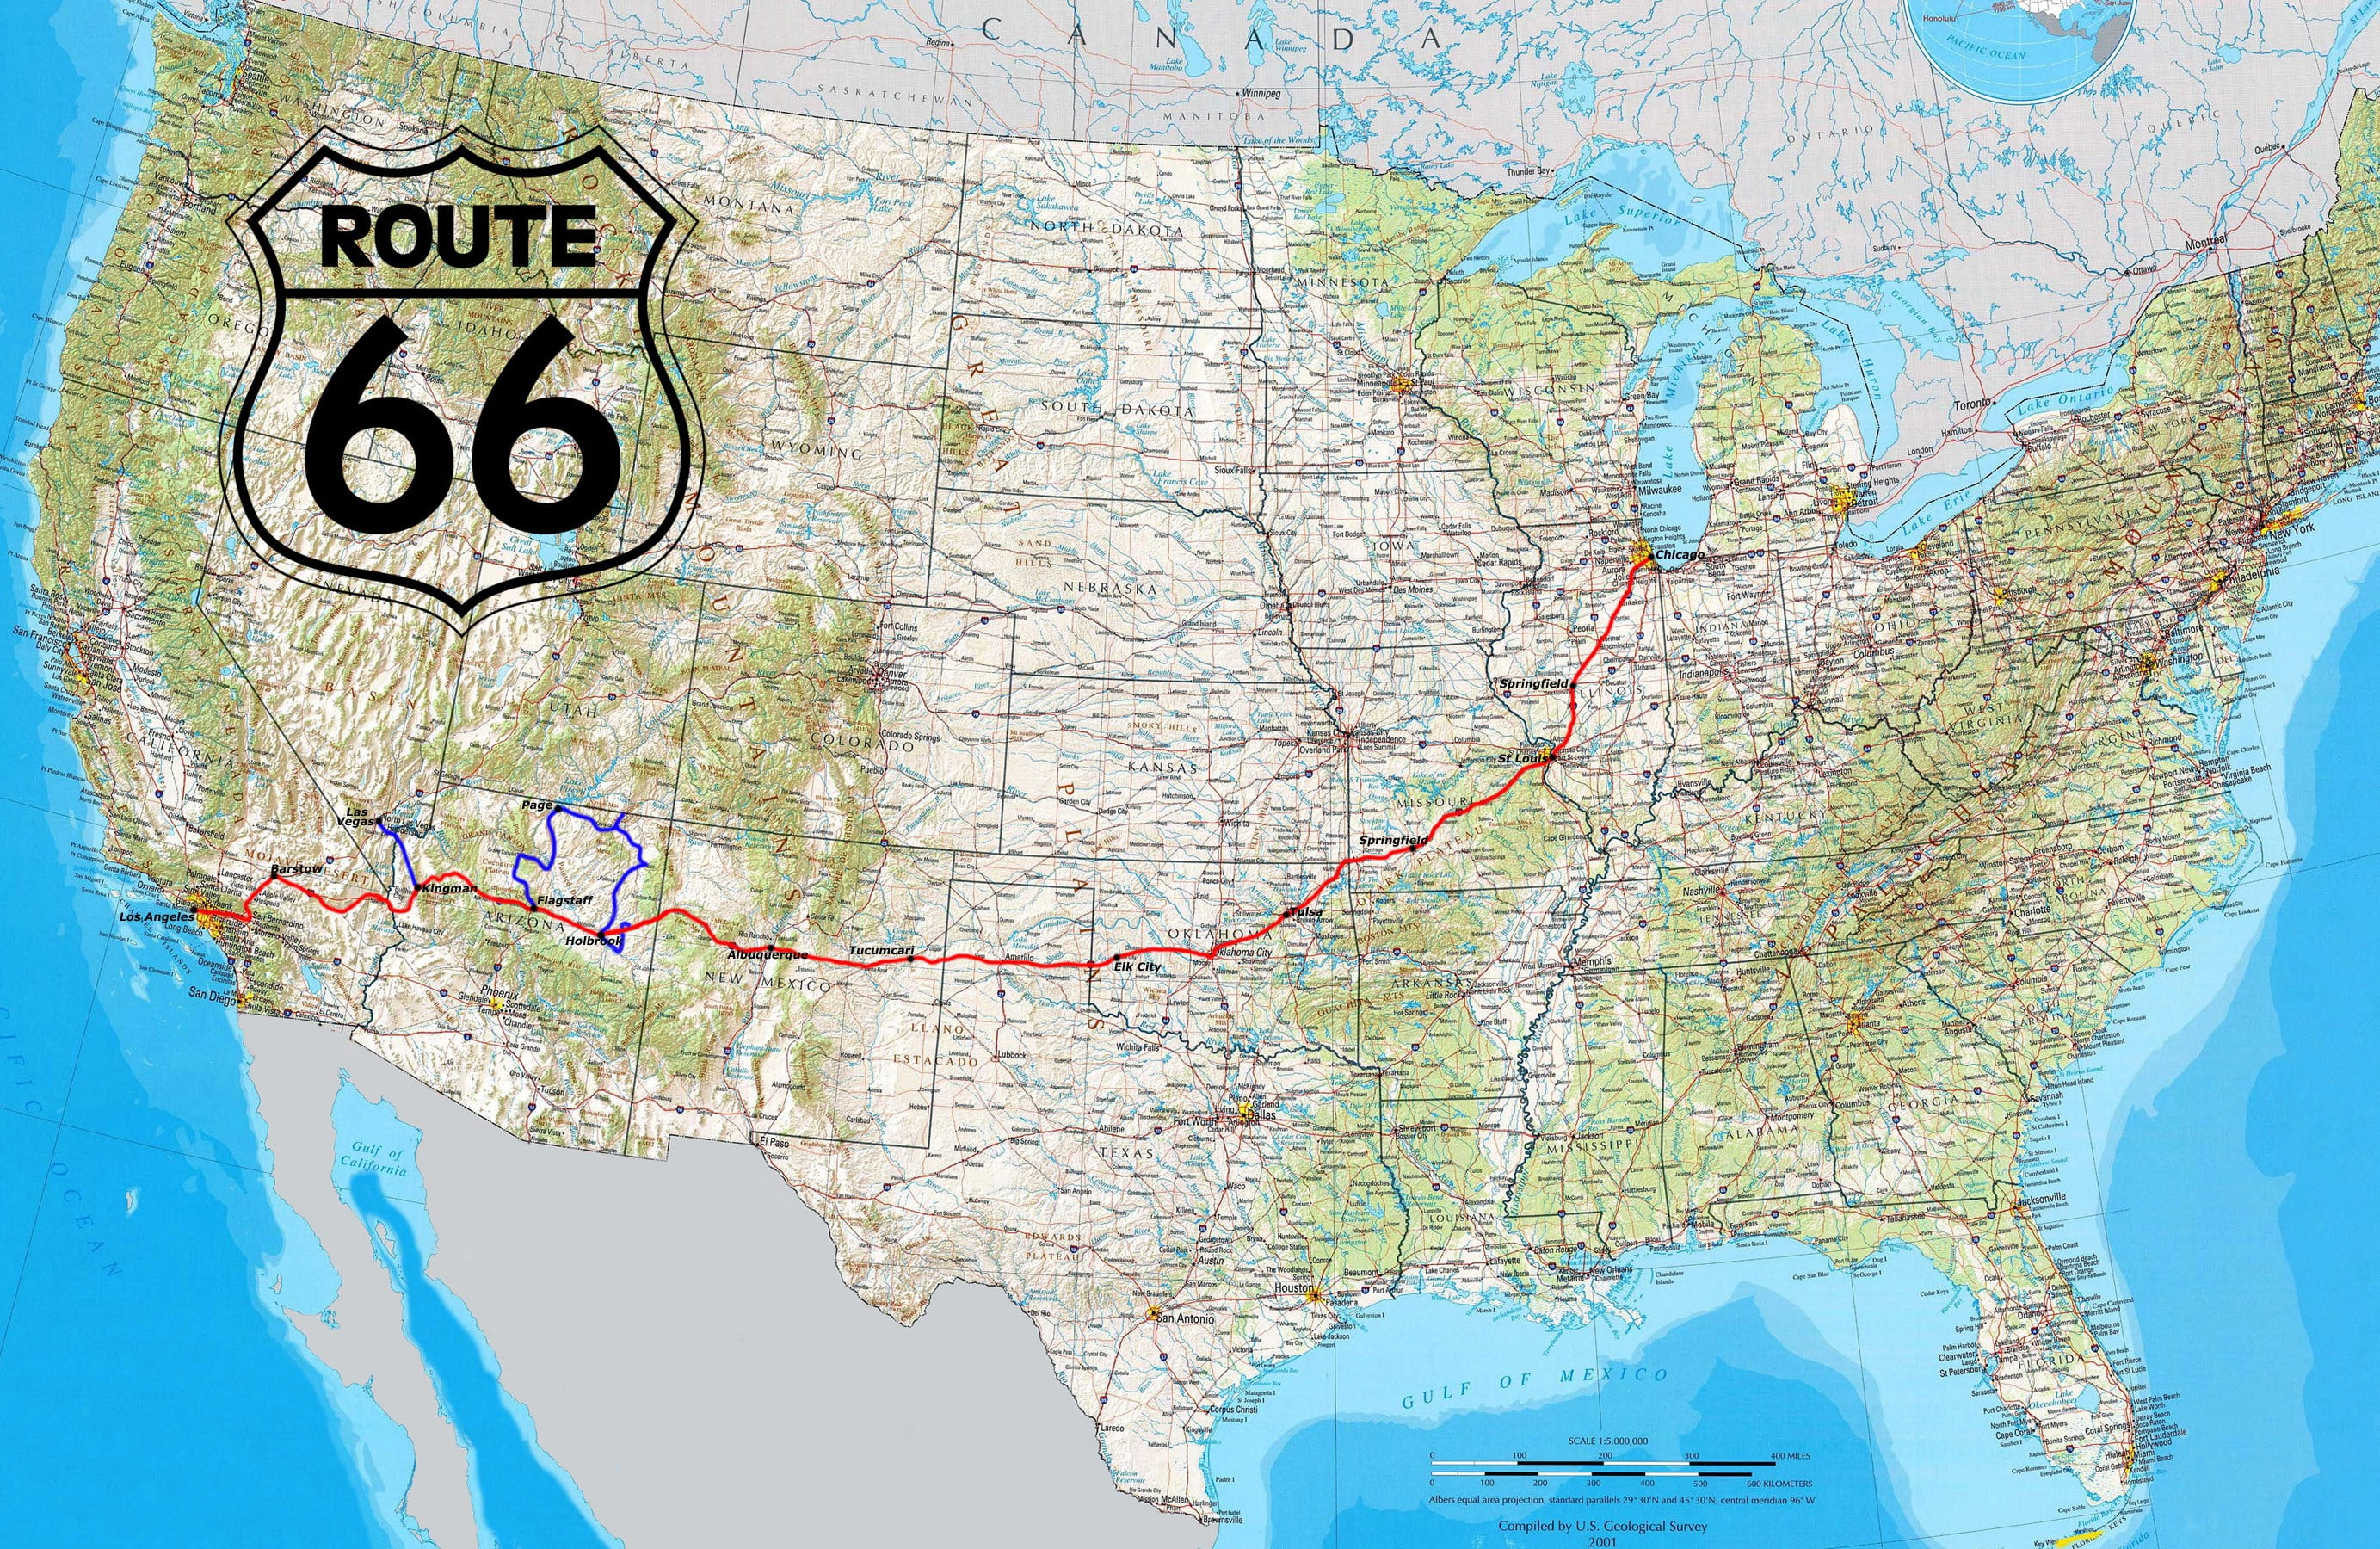 route 66 map usa Route 66 Map Road Route 66 Usa Highway Hd Wallpaper route 66 map usa